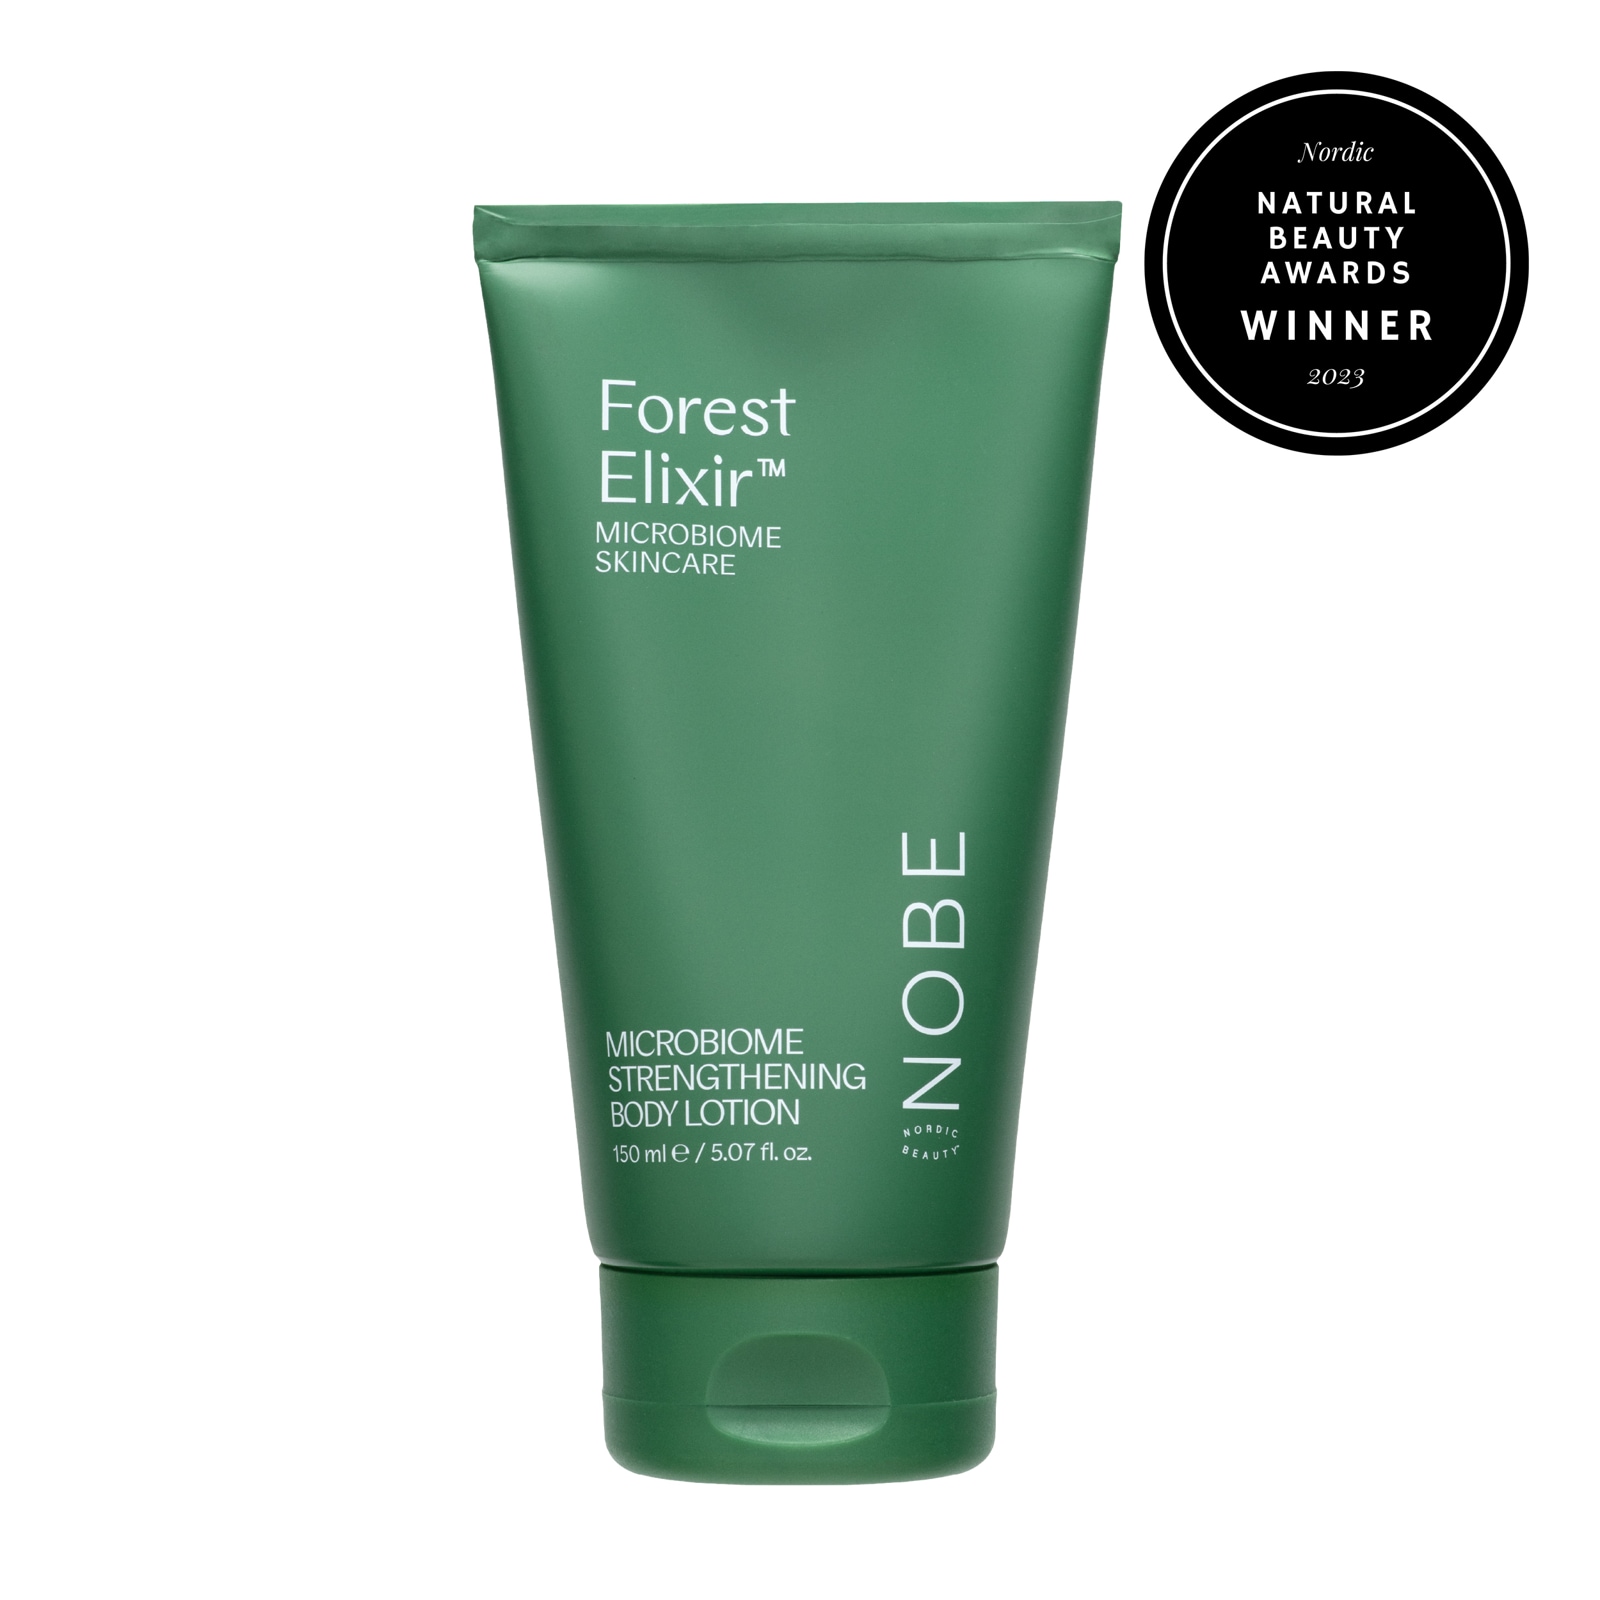 NOBE Microbiome Strengthening Body Lotion